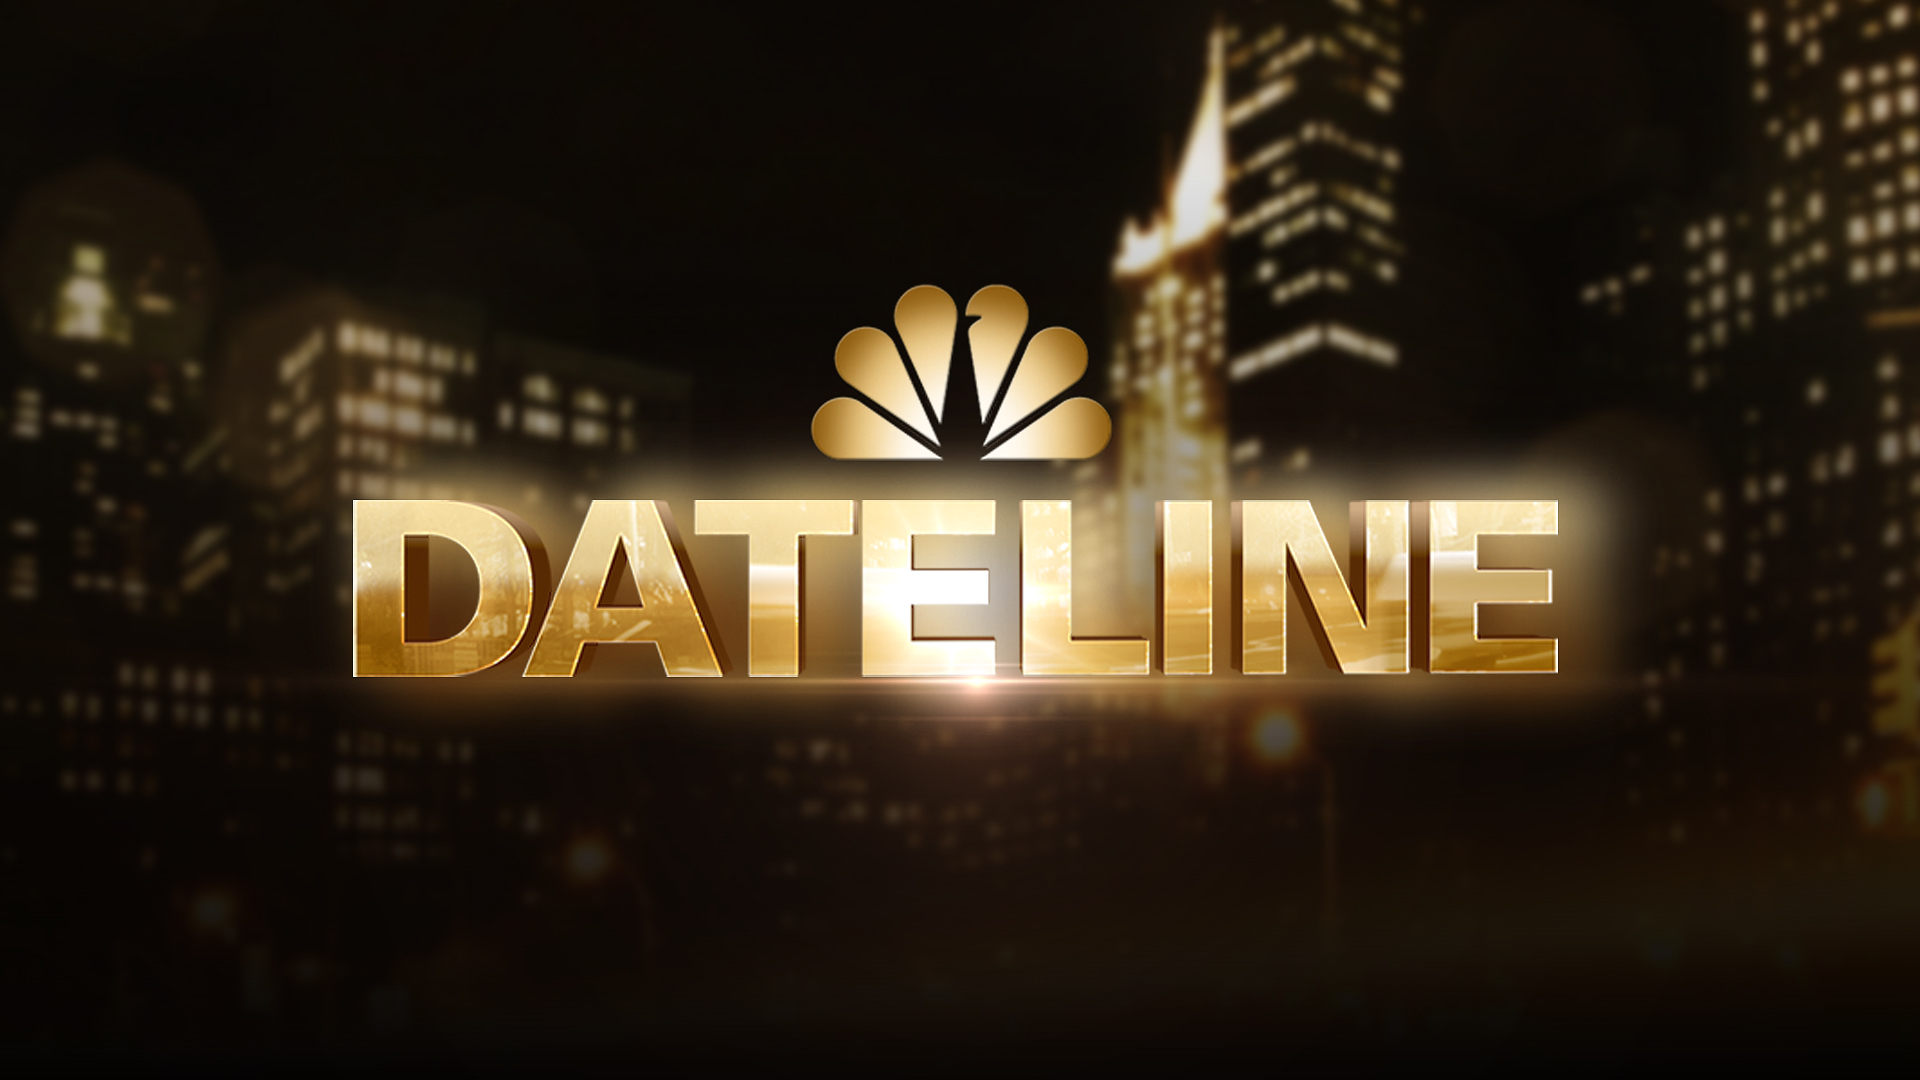 Why did dateline get cancelled?